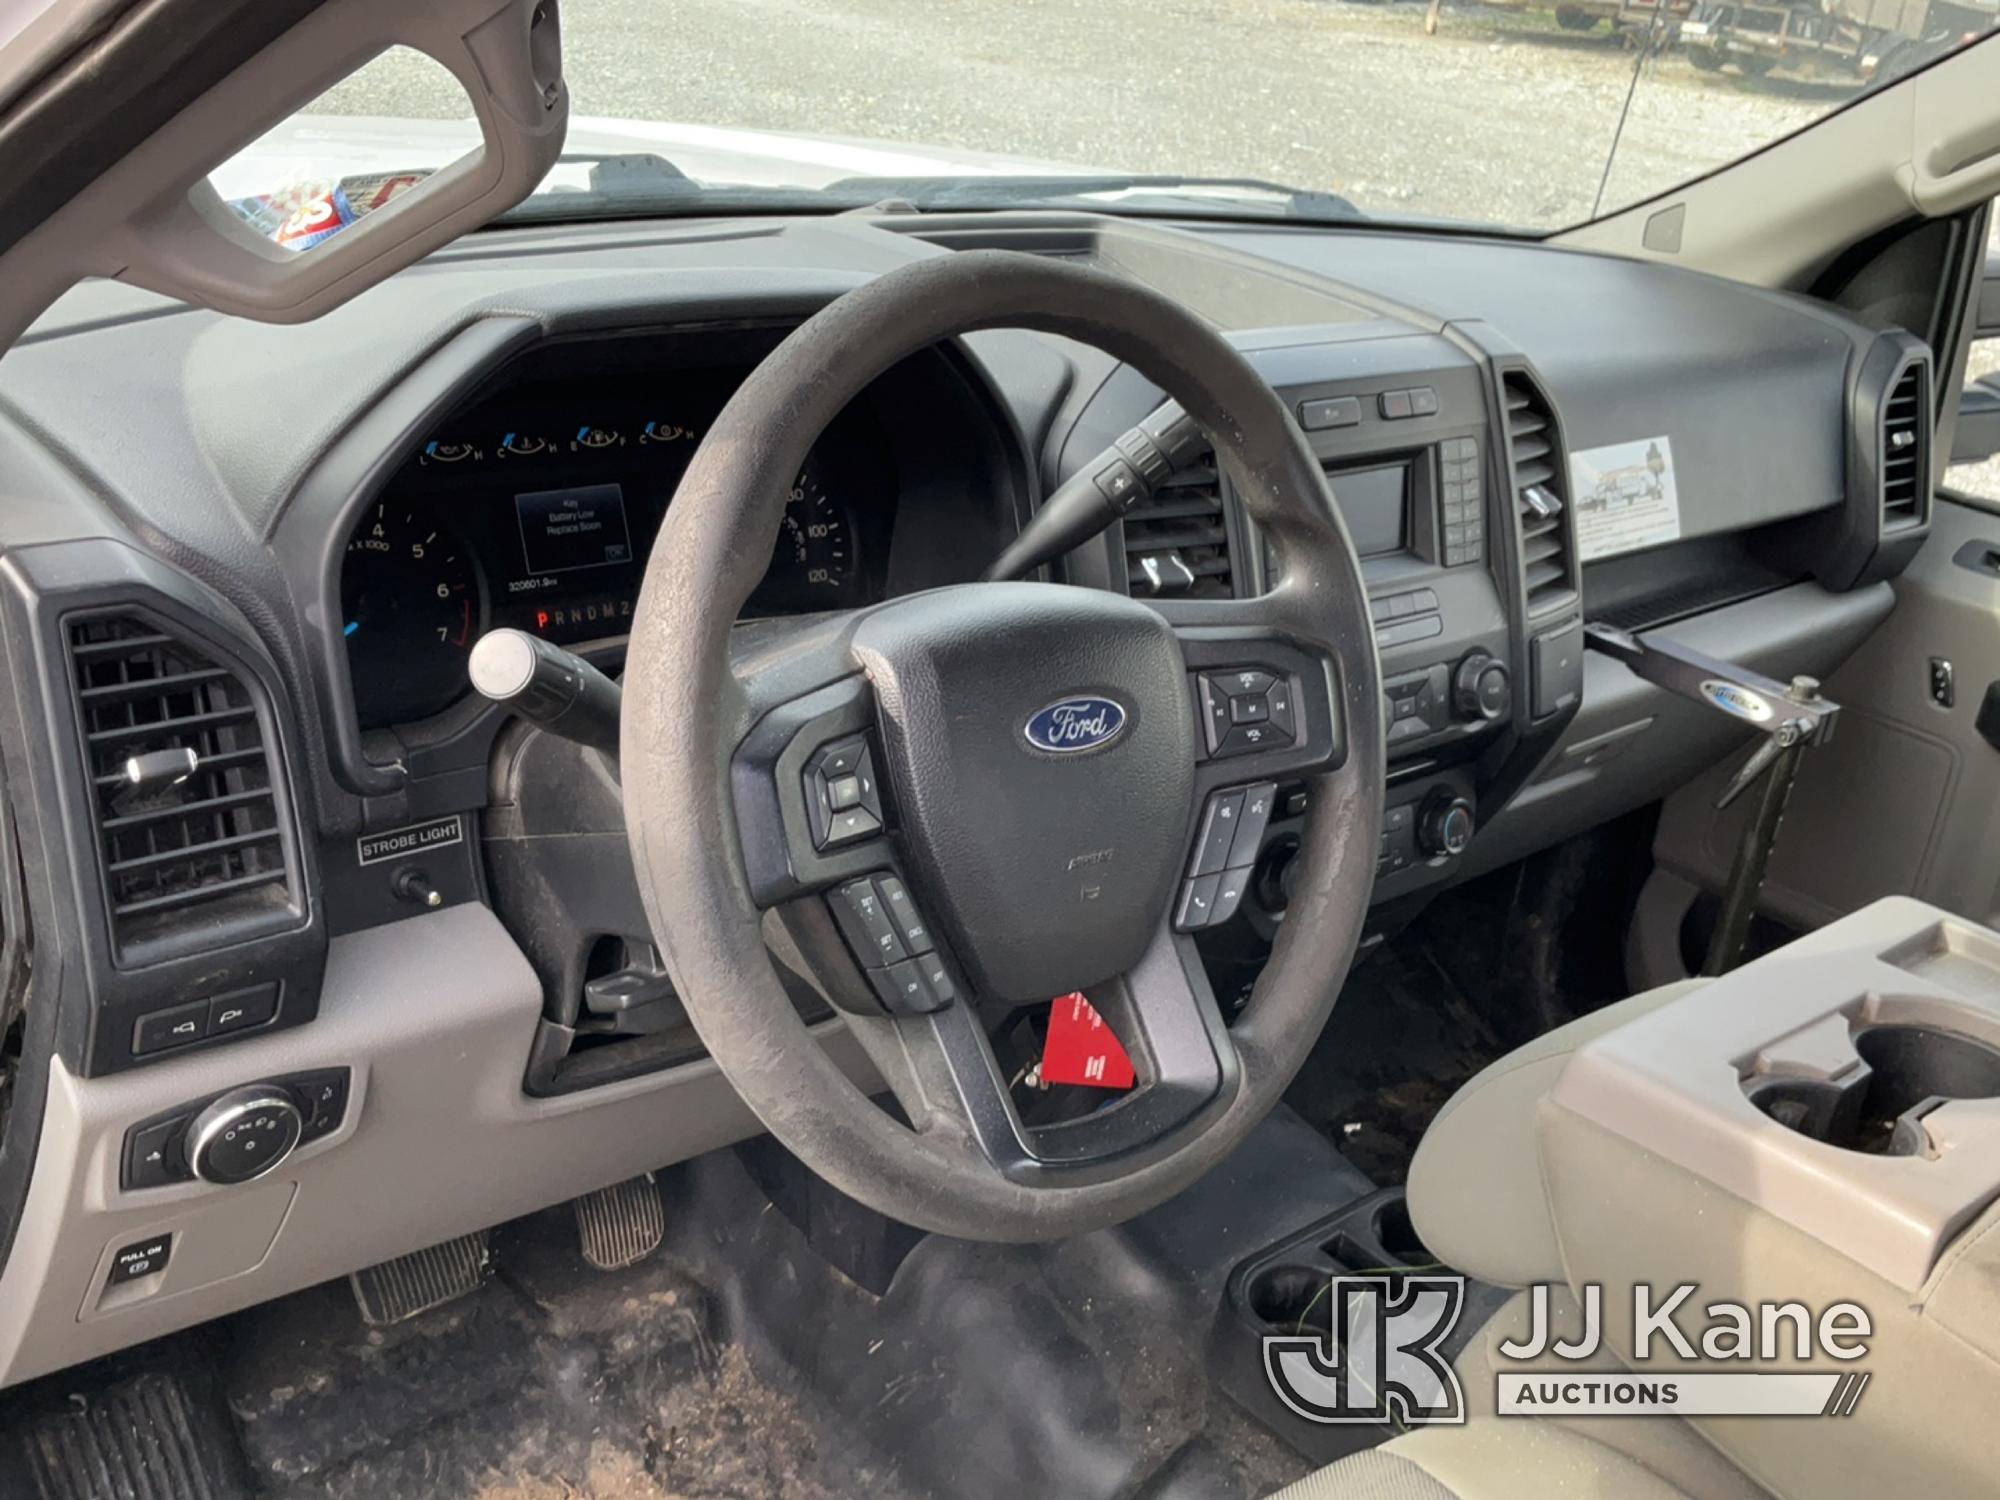 (Hawk Point, MO) 2016 Ford F150 4x4 Extended-Cab Pickup Truck Runs & Moves)  (Check Engine Light On,